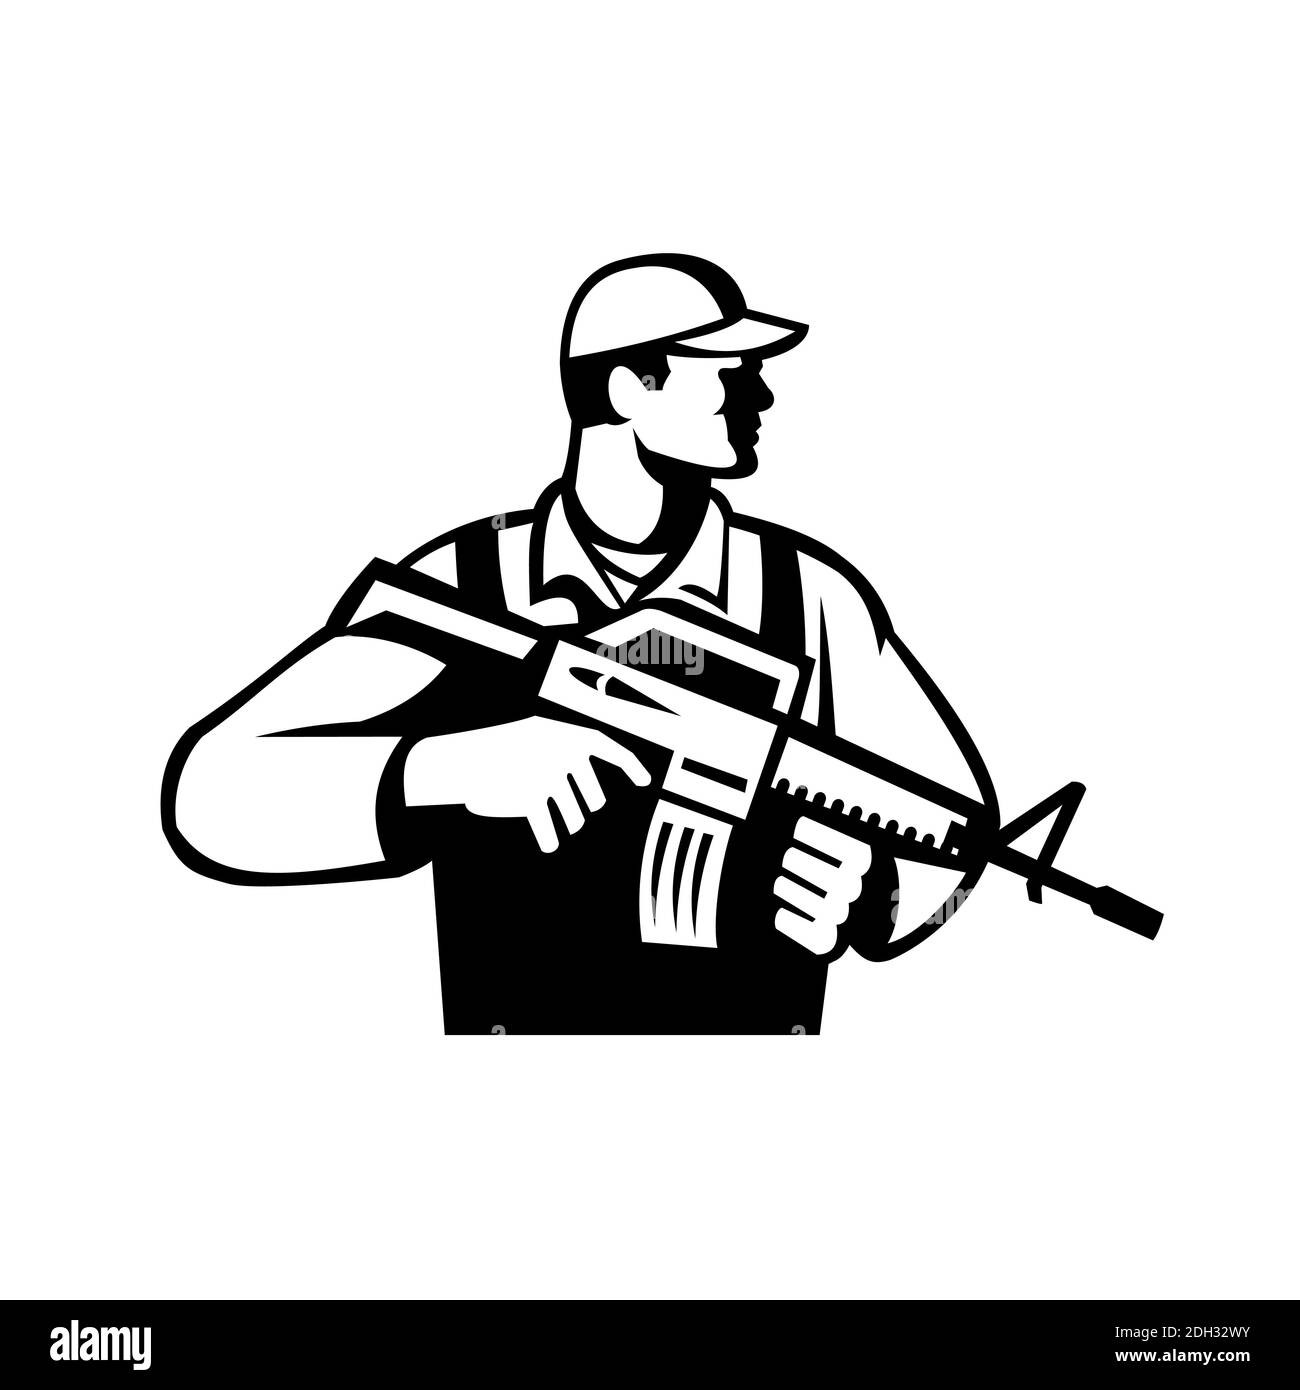 Soldier or Military Serviceman With Assault Rifle Looking Side Retro Black and White Stock Photo